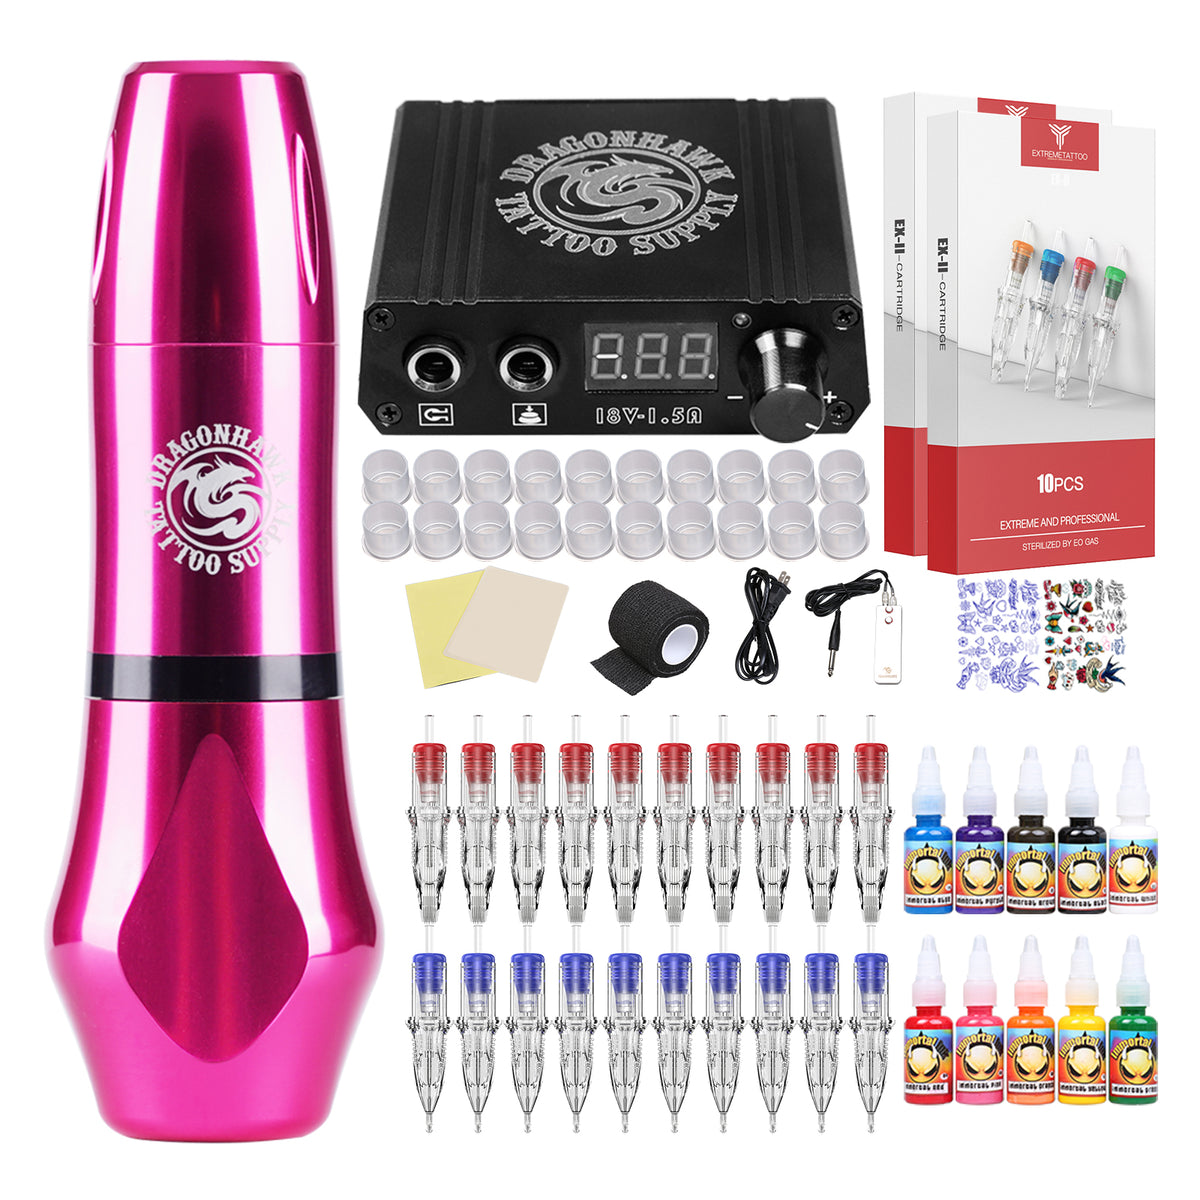 Dragonhawk Extreme Rotary Tattoo Kit With Power Supply Needles 22ss D1013 4  From Tattoodiy, $50.16